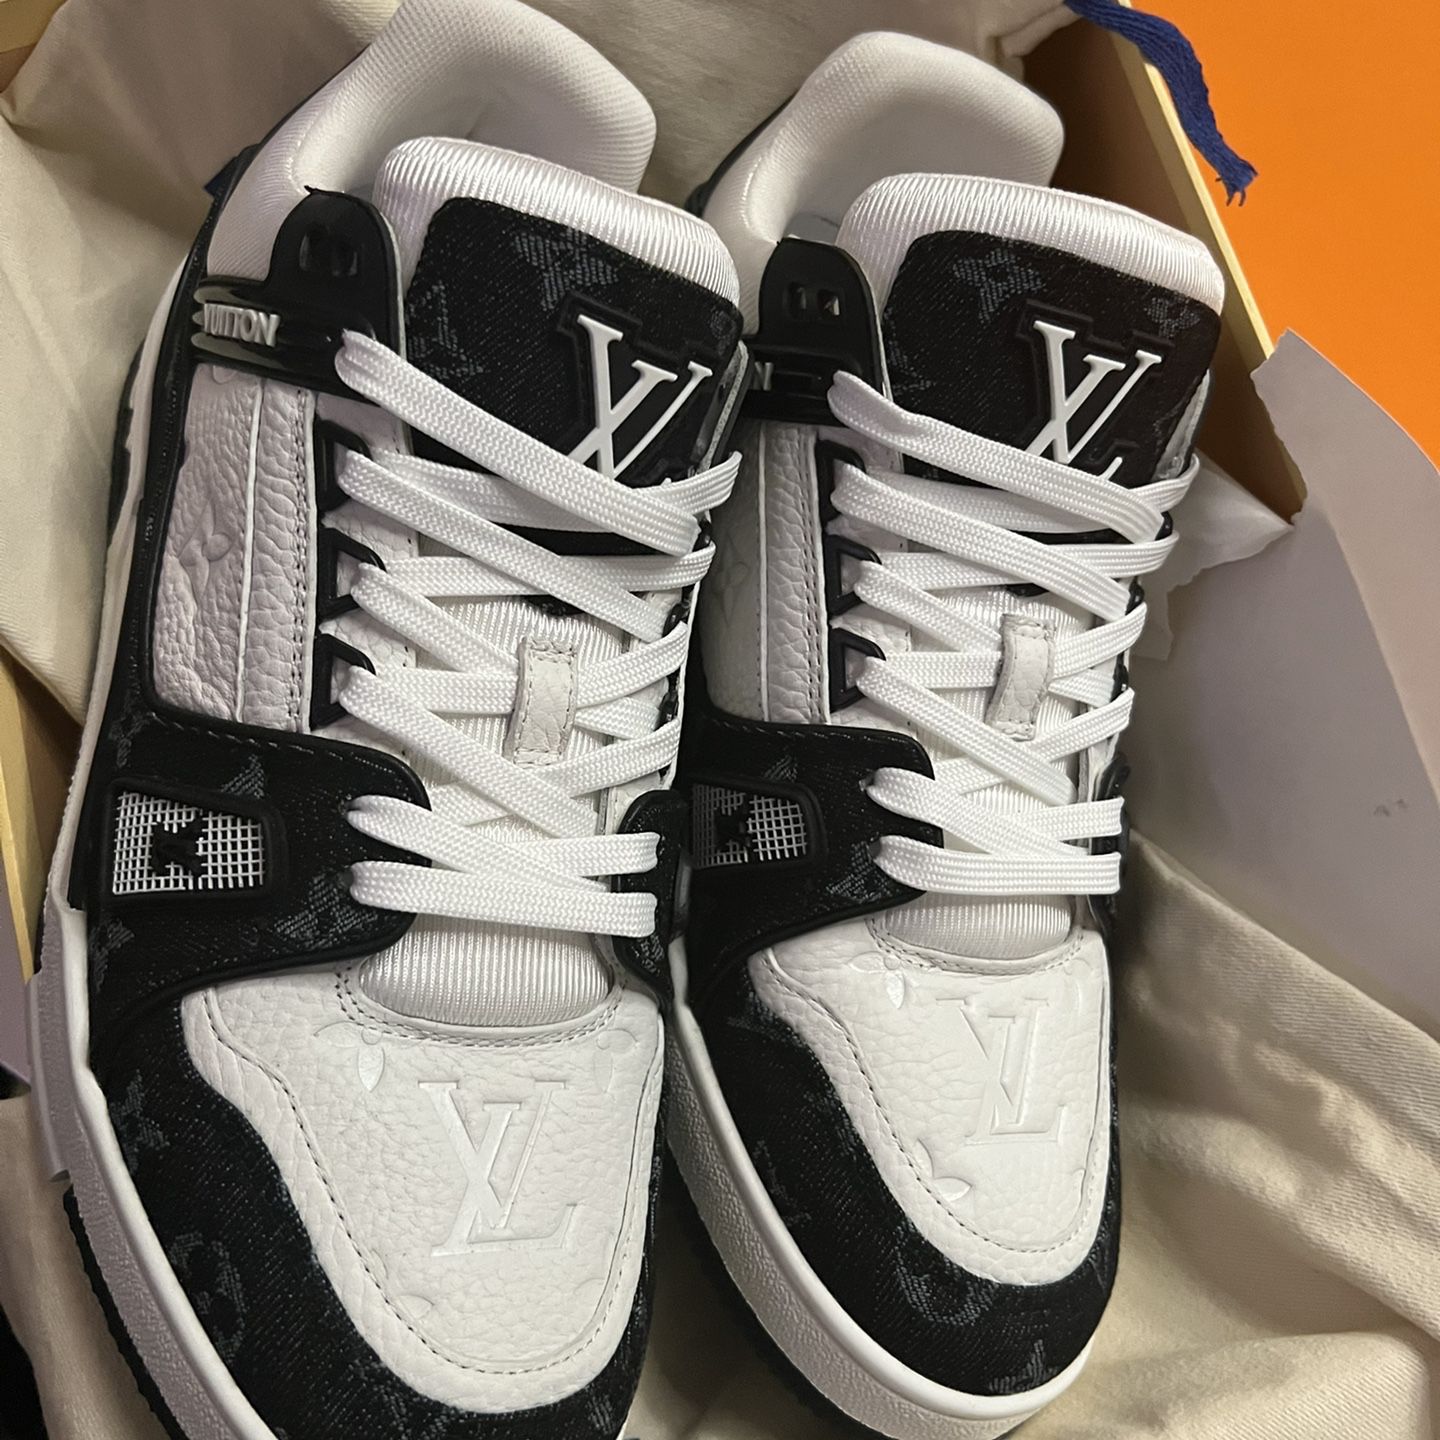 Authentic Louis Vuitton Turenne PM for Sale in Houston, TX - OfferUp